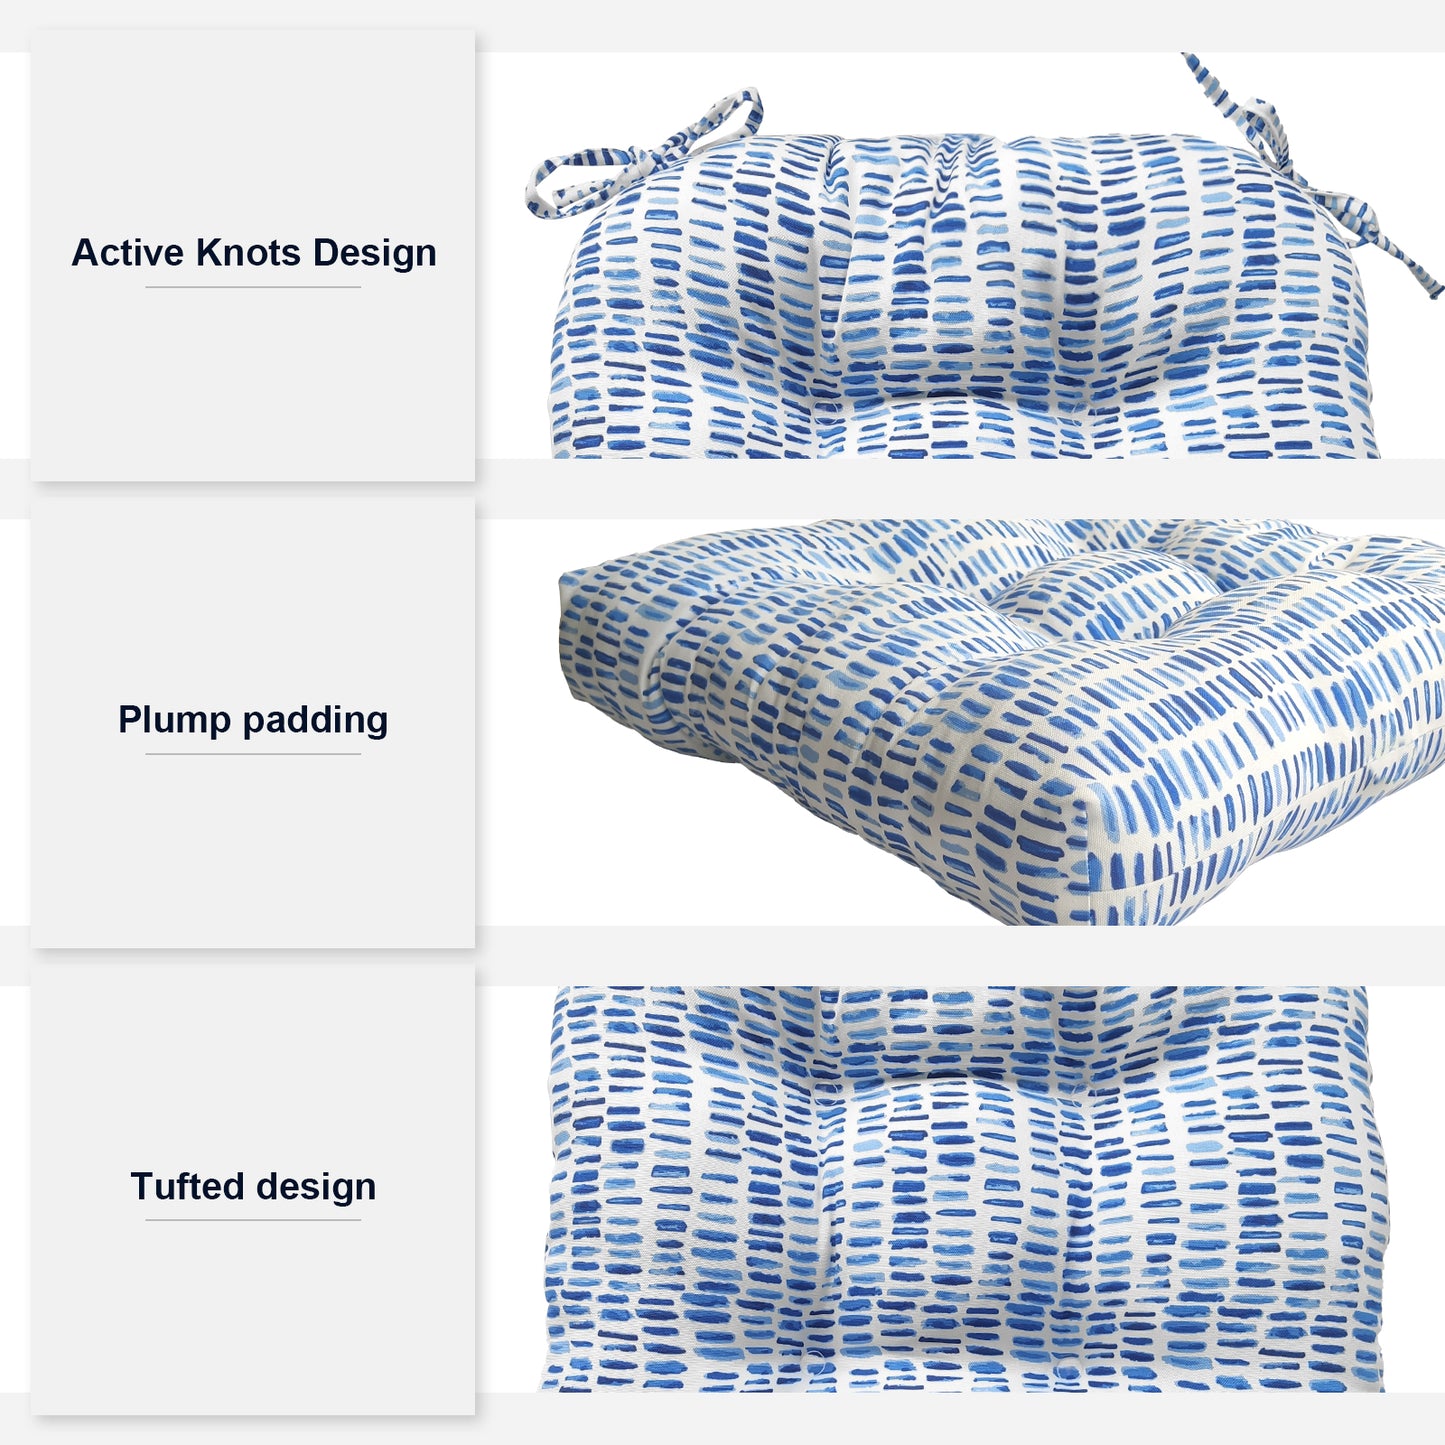 Melody Elephant Patio Wicker Chair Cushions, All Weather Outdoor Tufted Chair Pads Pack of 2, 19 x 19 x 5 Inch U-Shaped Seat Cushions of Garden Furniture Decoration, Pebble Blue